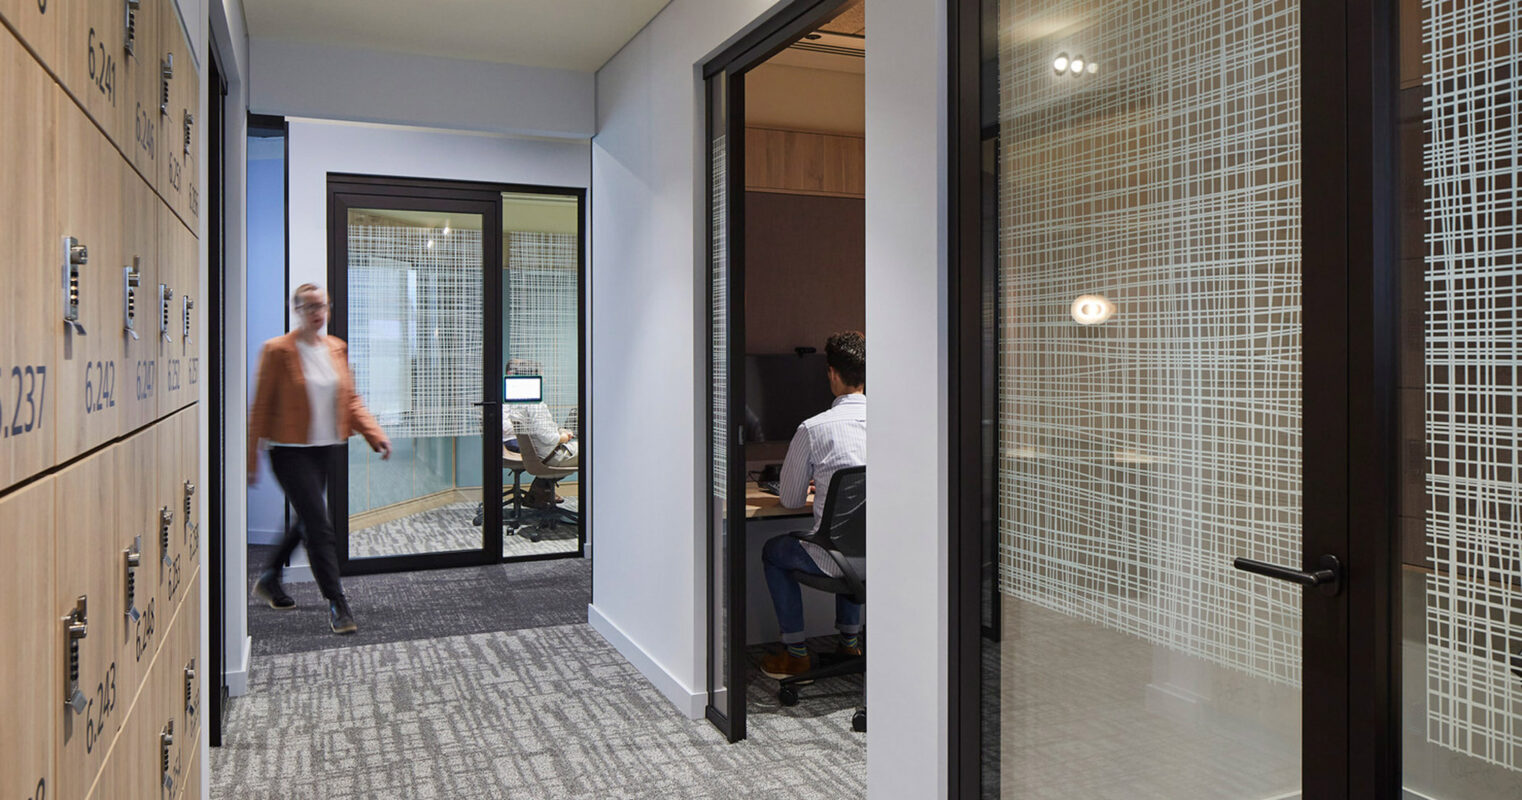 Contemporary office space featuring glass partition walls with embedded wire mesh, modern blue cabinetry with numbered lockers, and gray textured carpeting. Design promotes transparency and efficient use of space.